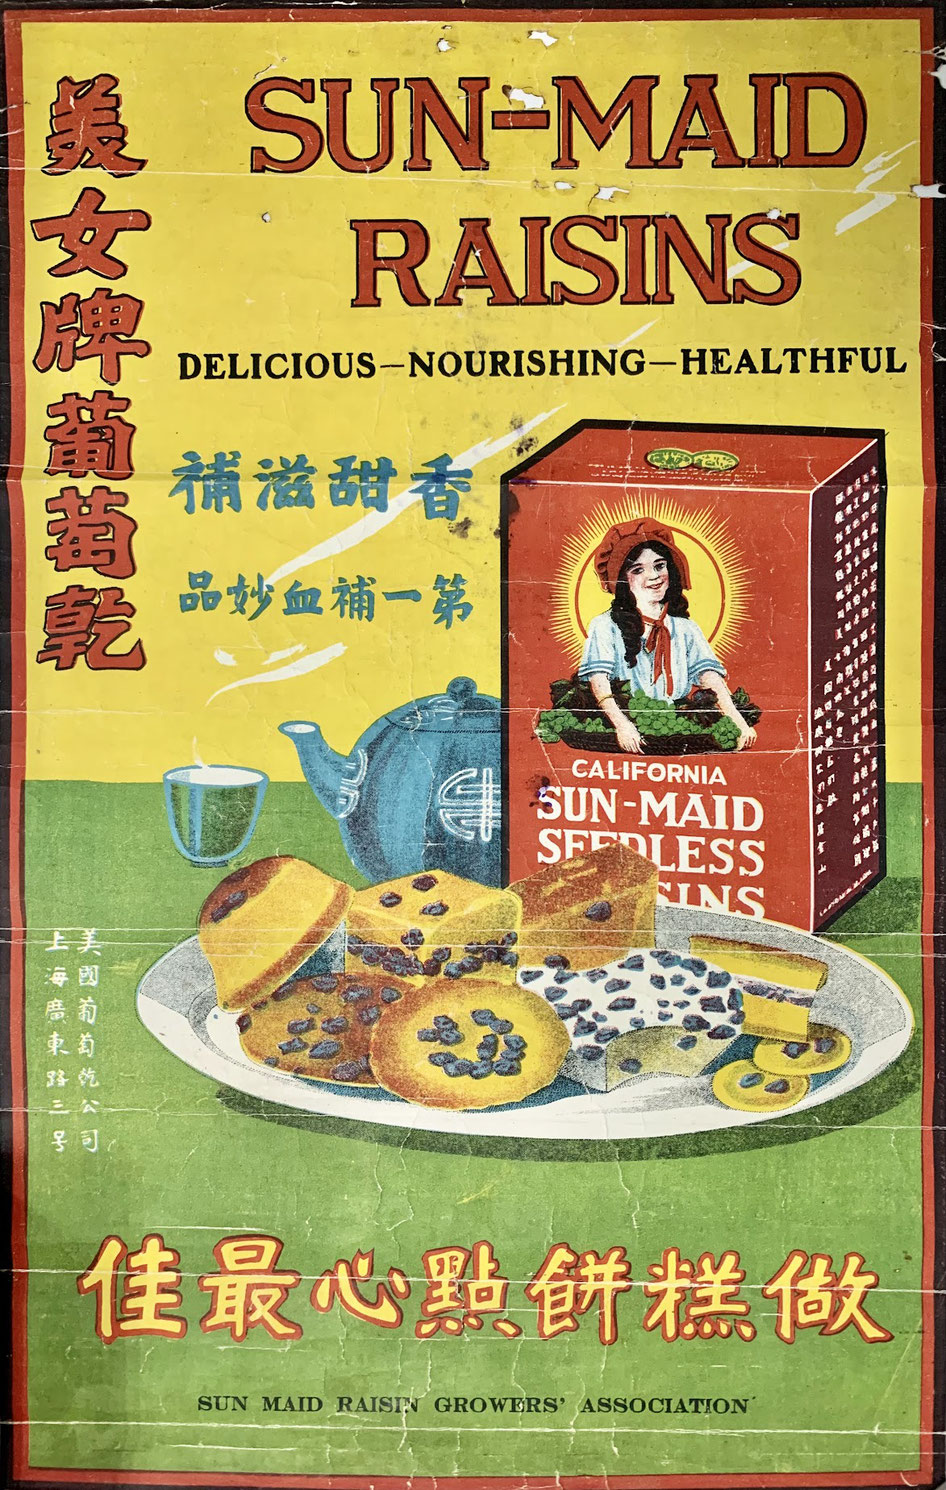 Ca. 1930s advertisement poster for Sun-Maid Raisins in China. From the MOFBA collection.